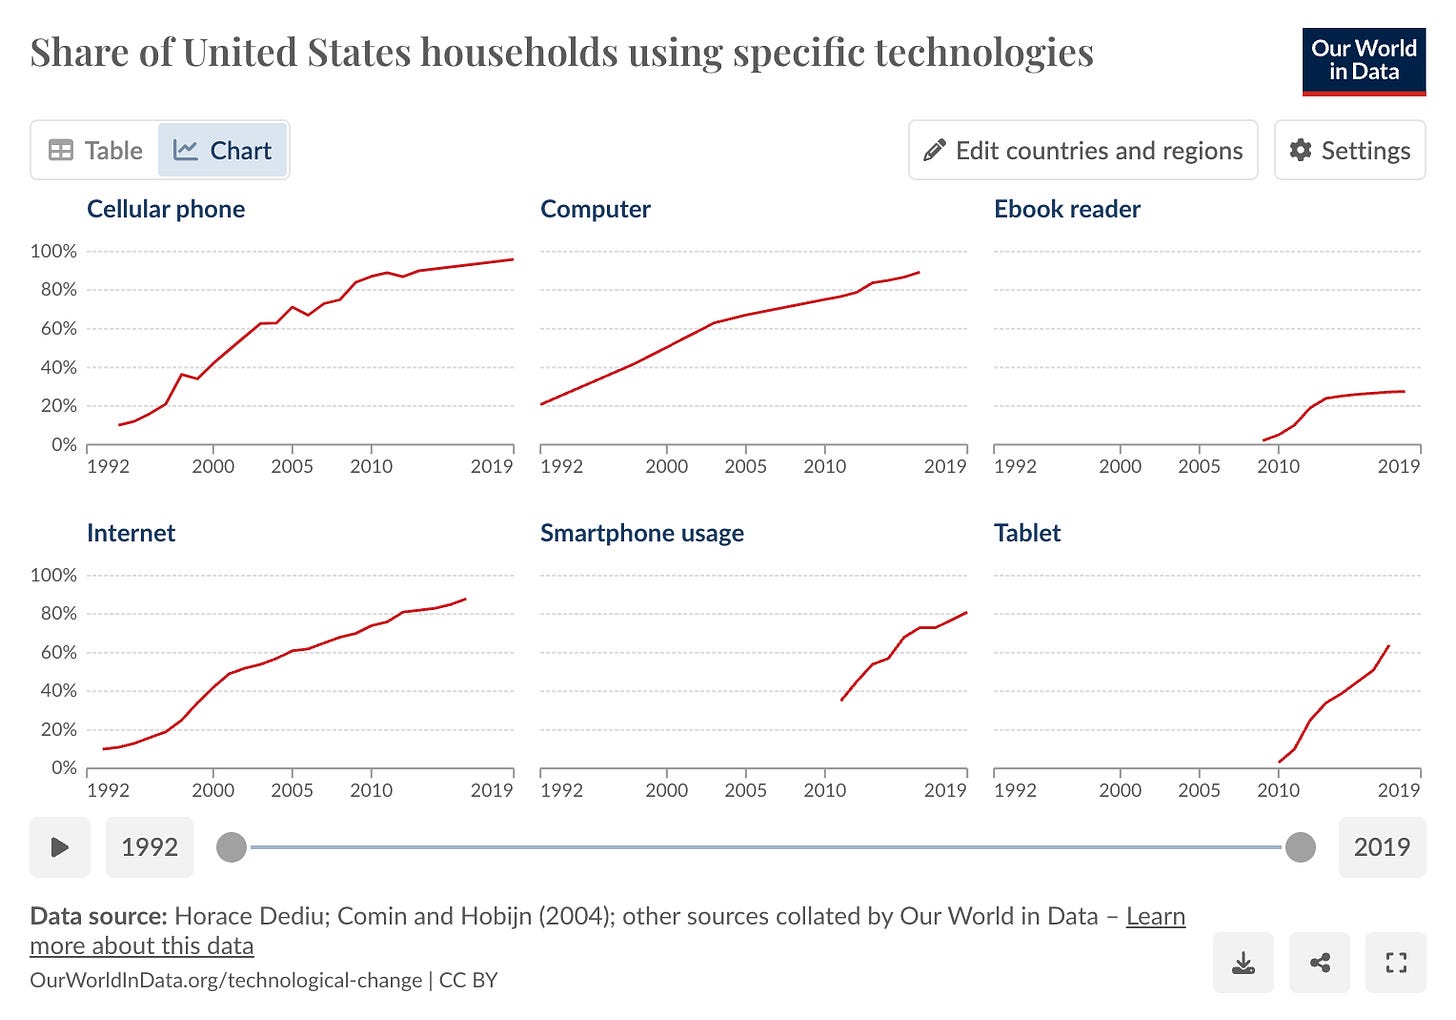 “Share of US households using specific technologies.” A set of six graphs demonstrating the adoption of the cell phone (steady increase since 1990s, now almost 100%), computer (steady increase since 1992, ~90% in 2019), ebook reader (growth from 2008-~2013, plateaued at ~25%), internet (steady increase since 1992, ~90% in 2019), smartphone usage (huge steep increase since 2011, ~80$ in 2019), and tablet (steep growth since 2010, >60% in 2019). 